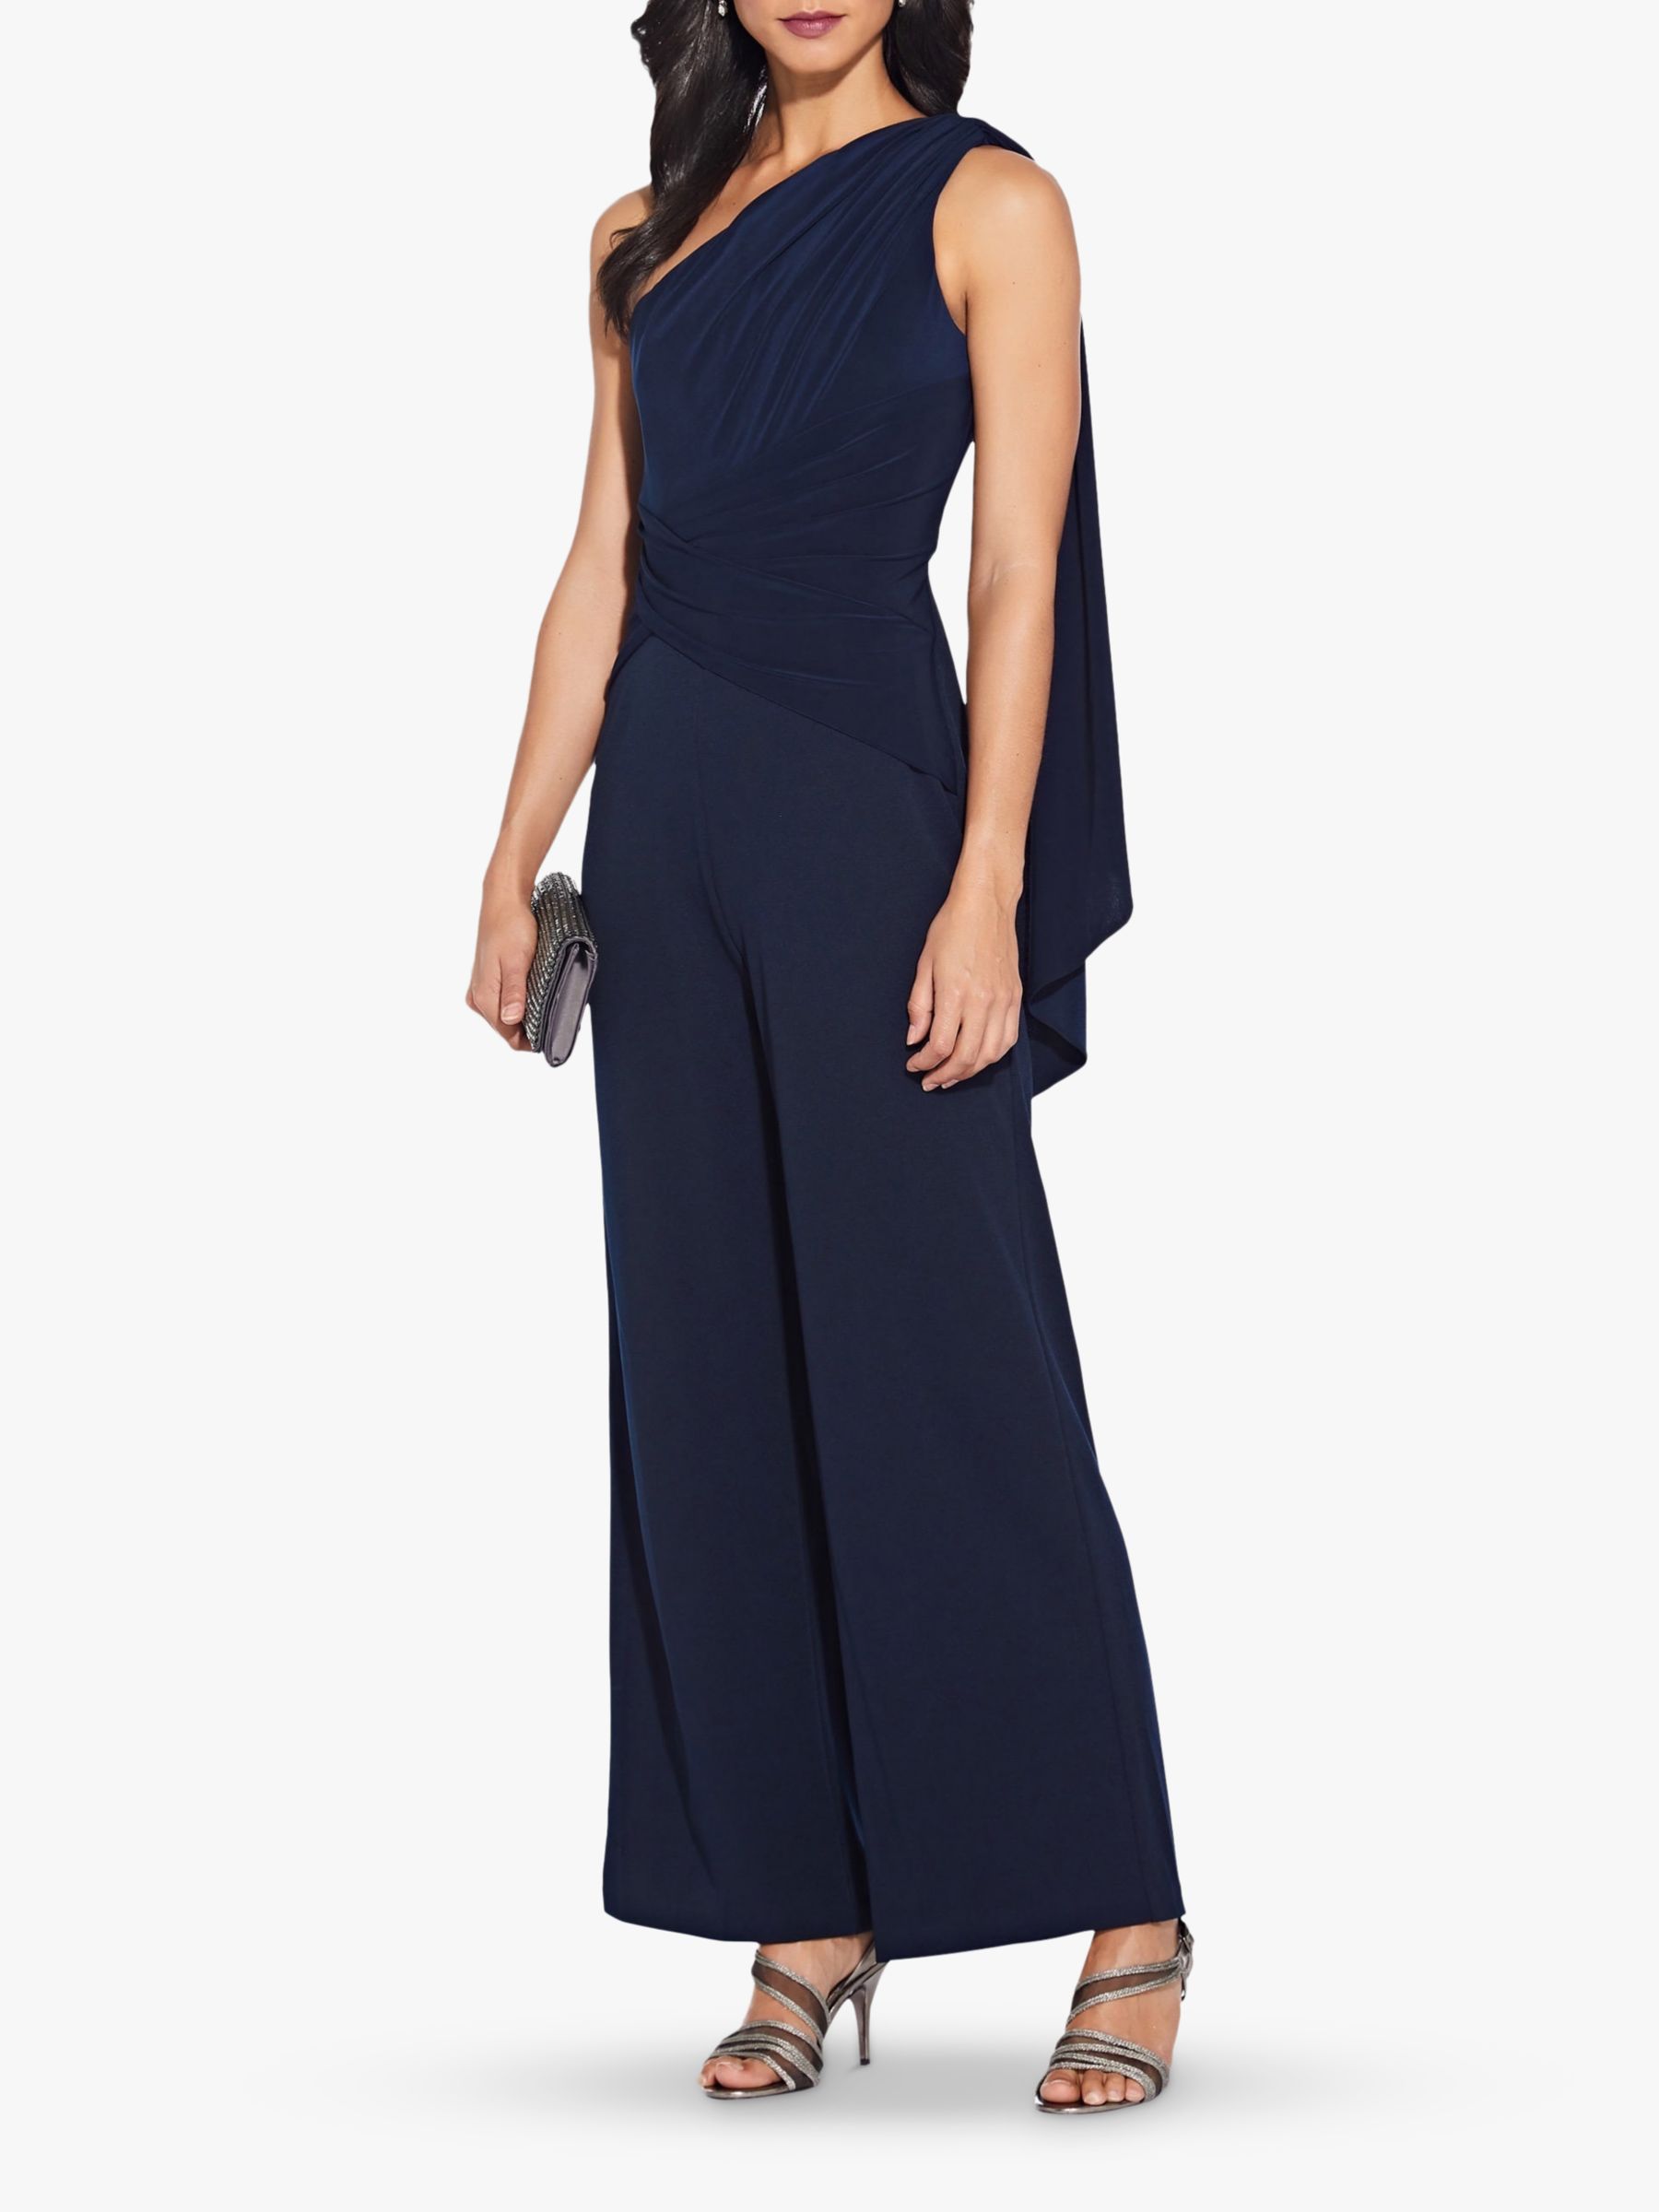 Adrianna Papell One Shoulder Jumpsuit, Midnight